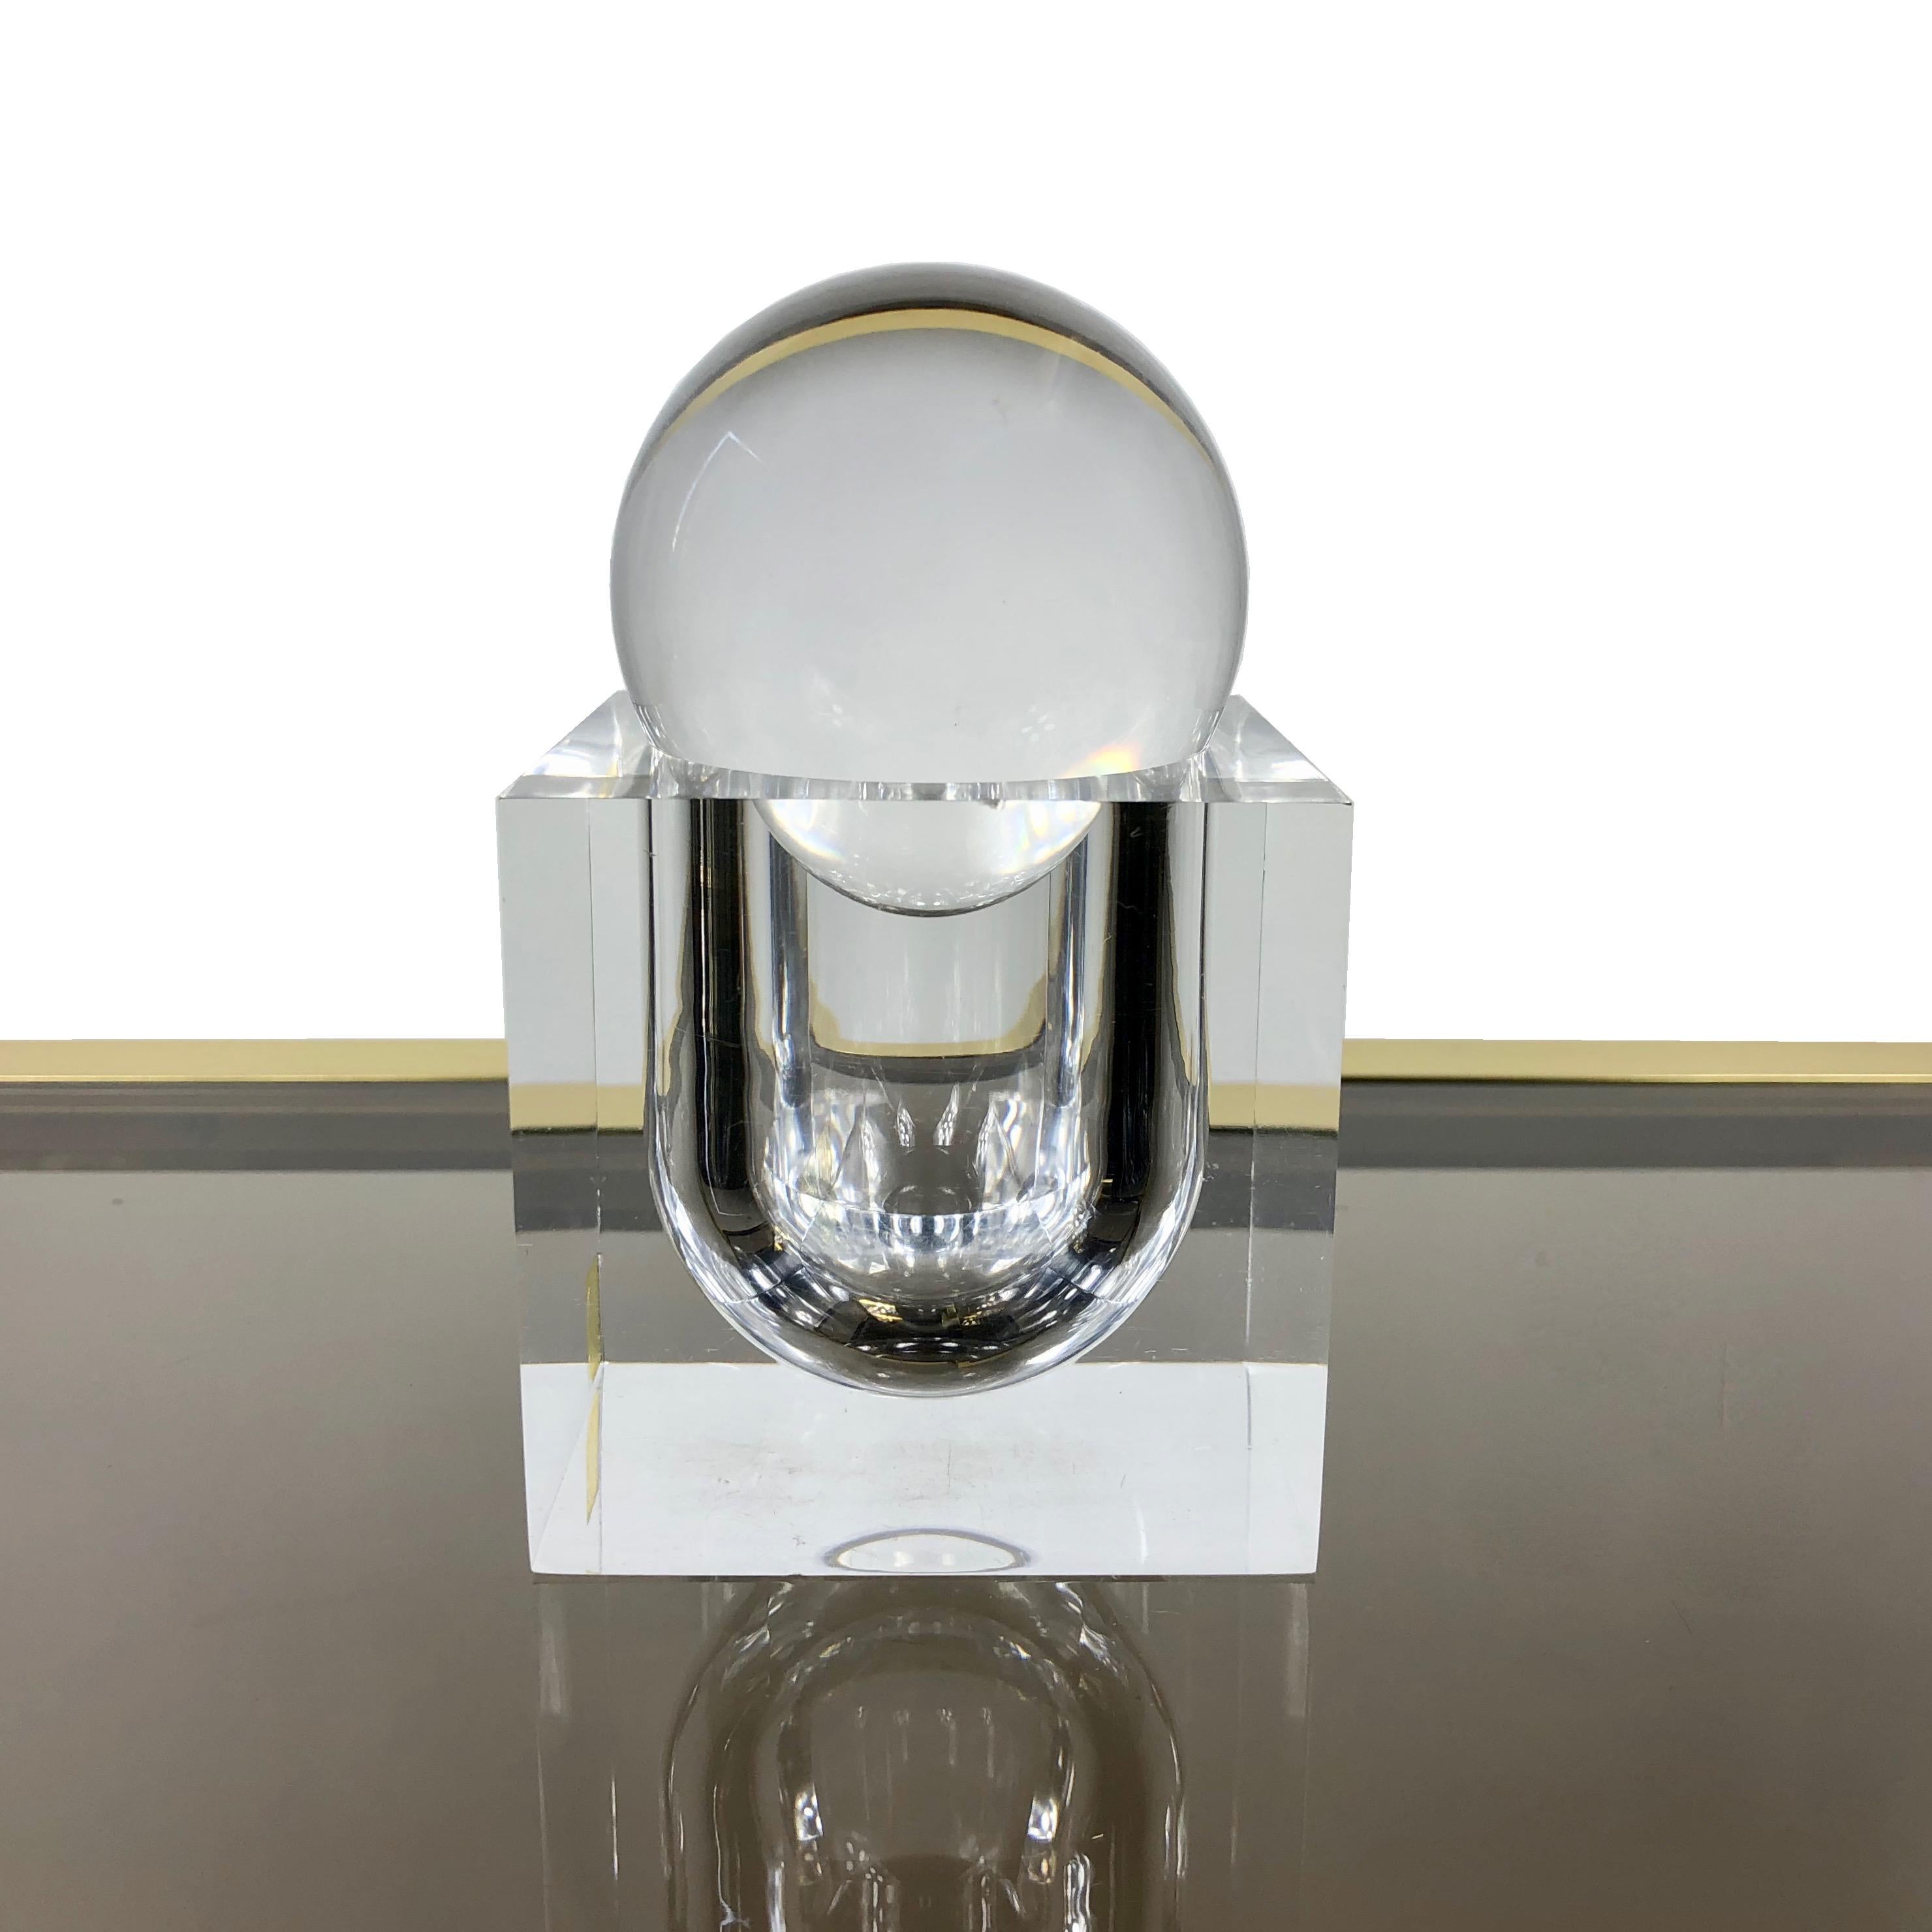 This Lucite art sculpture by Team Guzzini consists in two pieces: a sphere and a square base featuring a slot in which the sphere is inserted and which can also be used as a container. It can also be used as a paperweight or as a little box. 
The